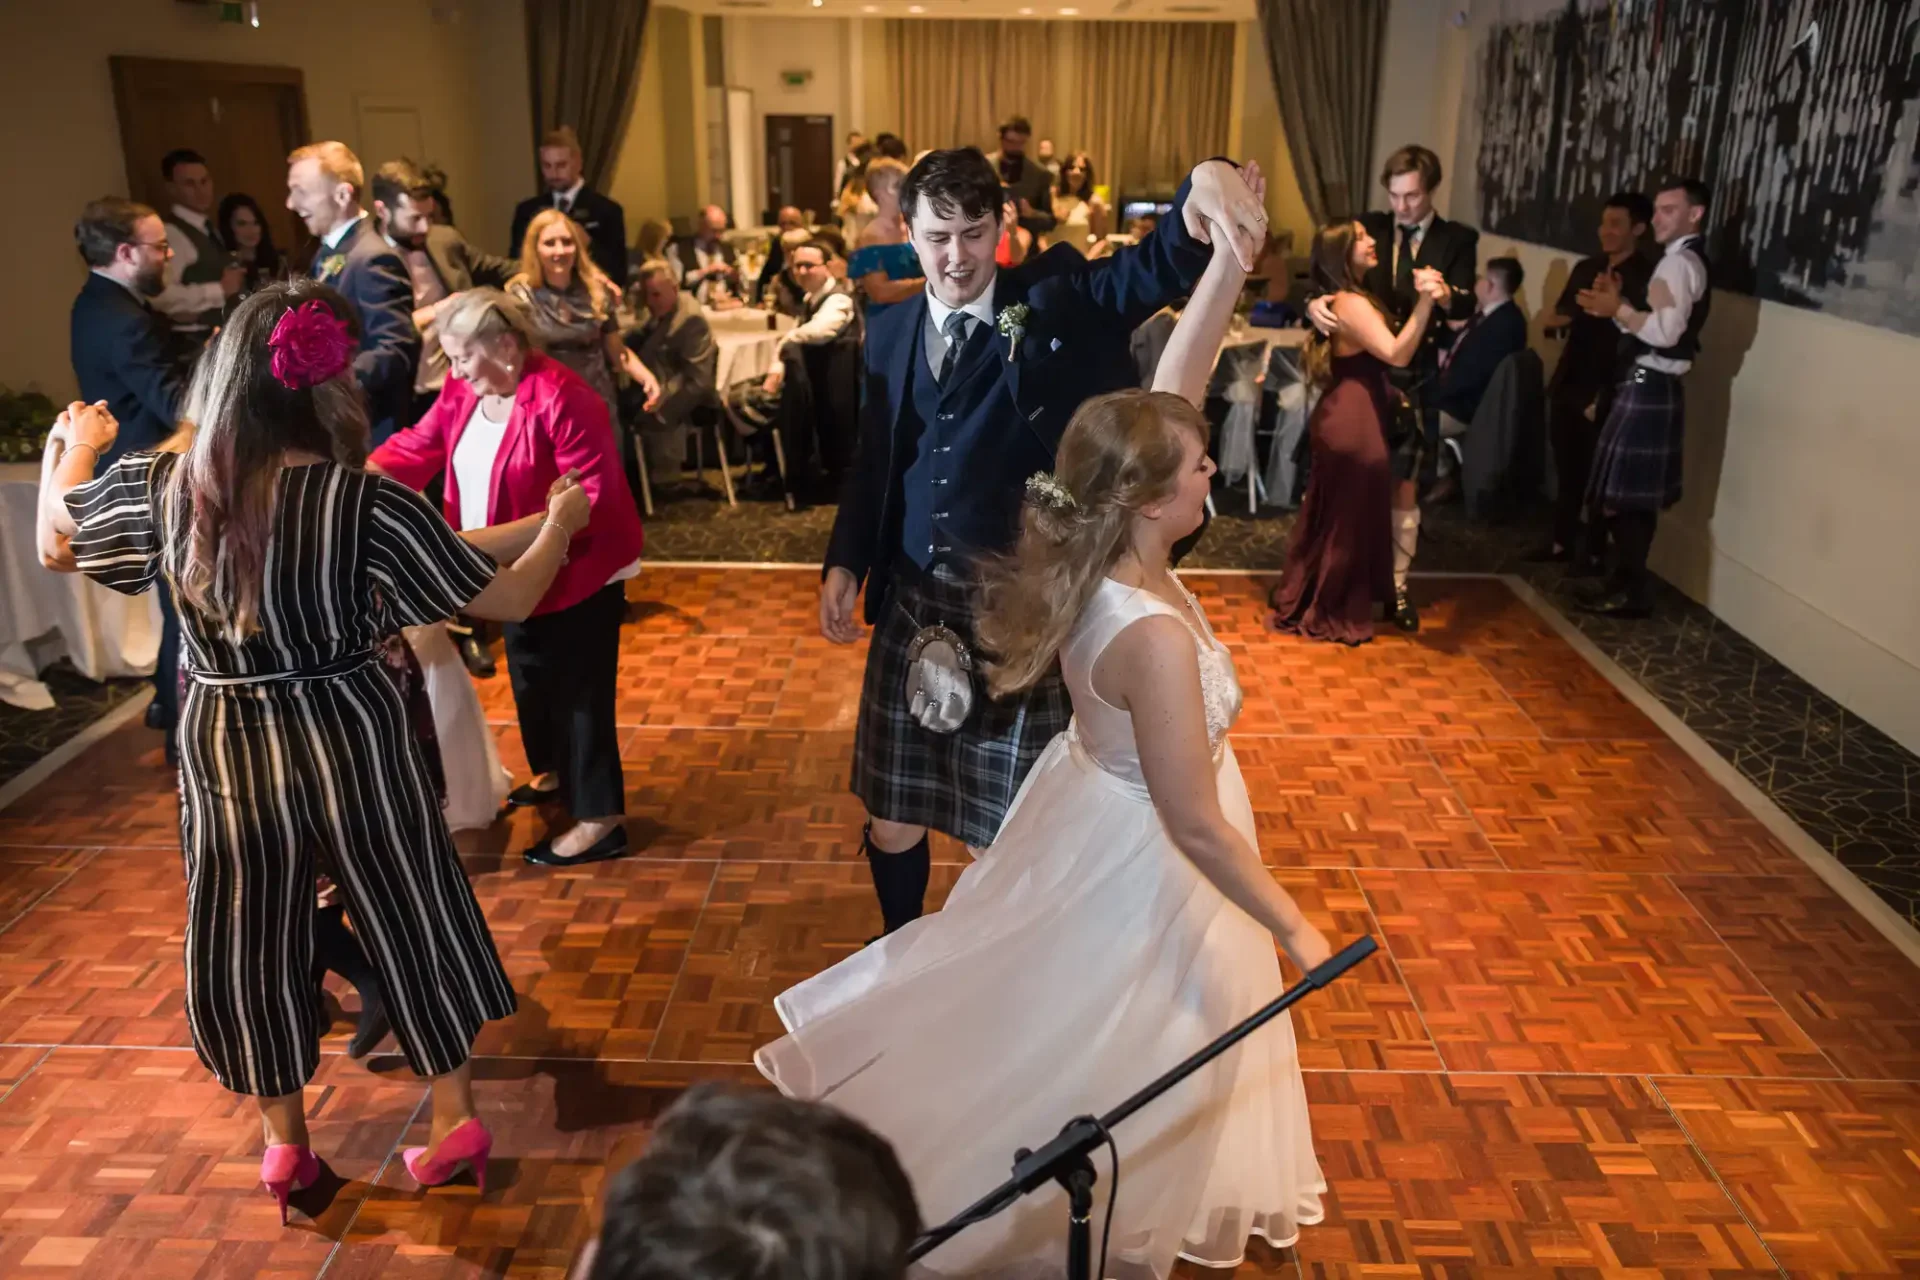 A bride and groom in traditional scottish attire dance joyfully with guests at their wedding reception.